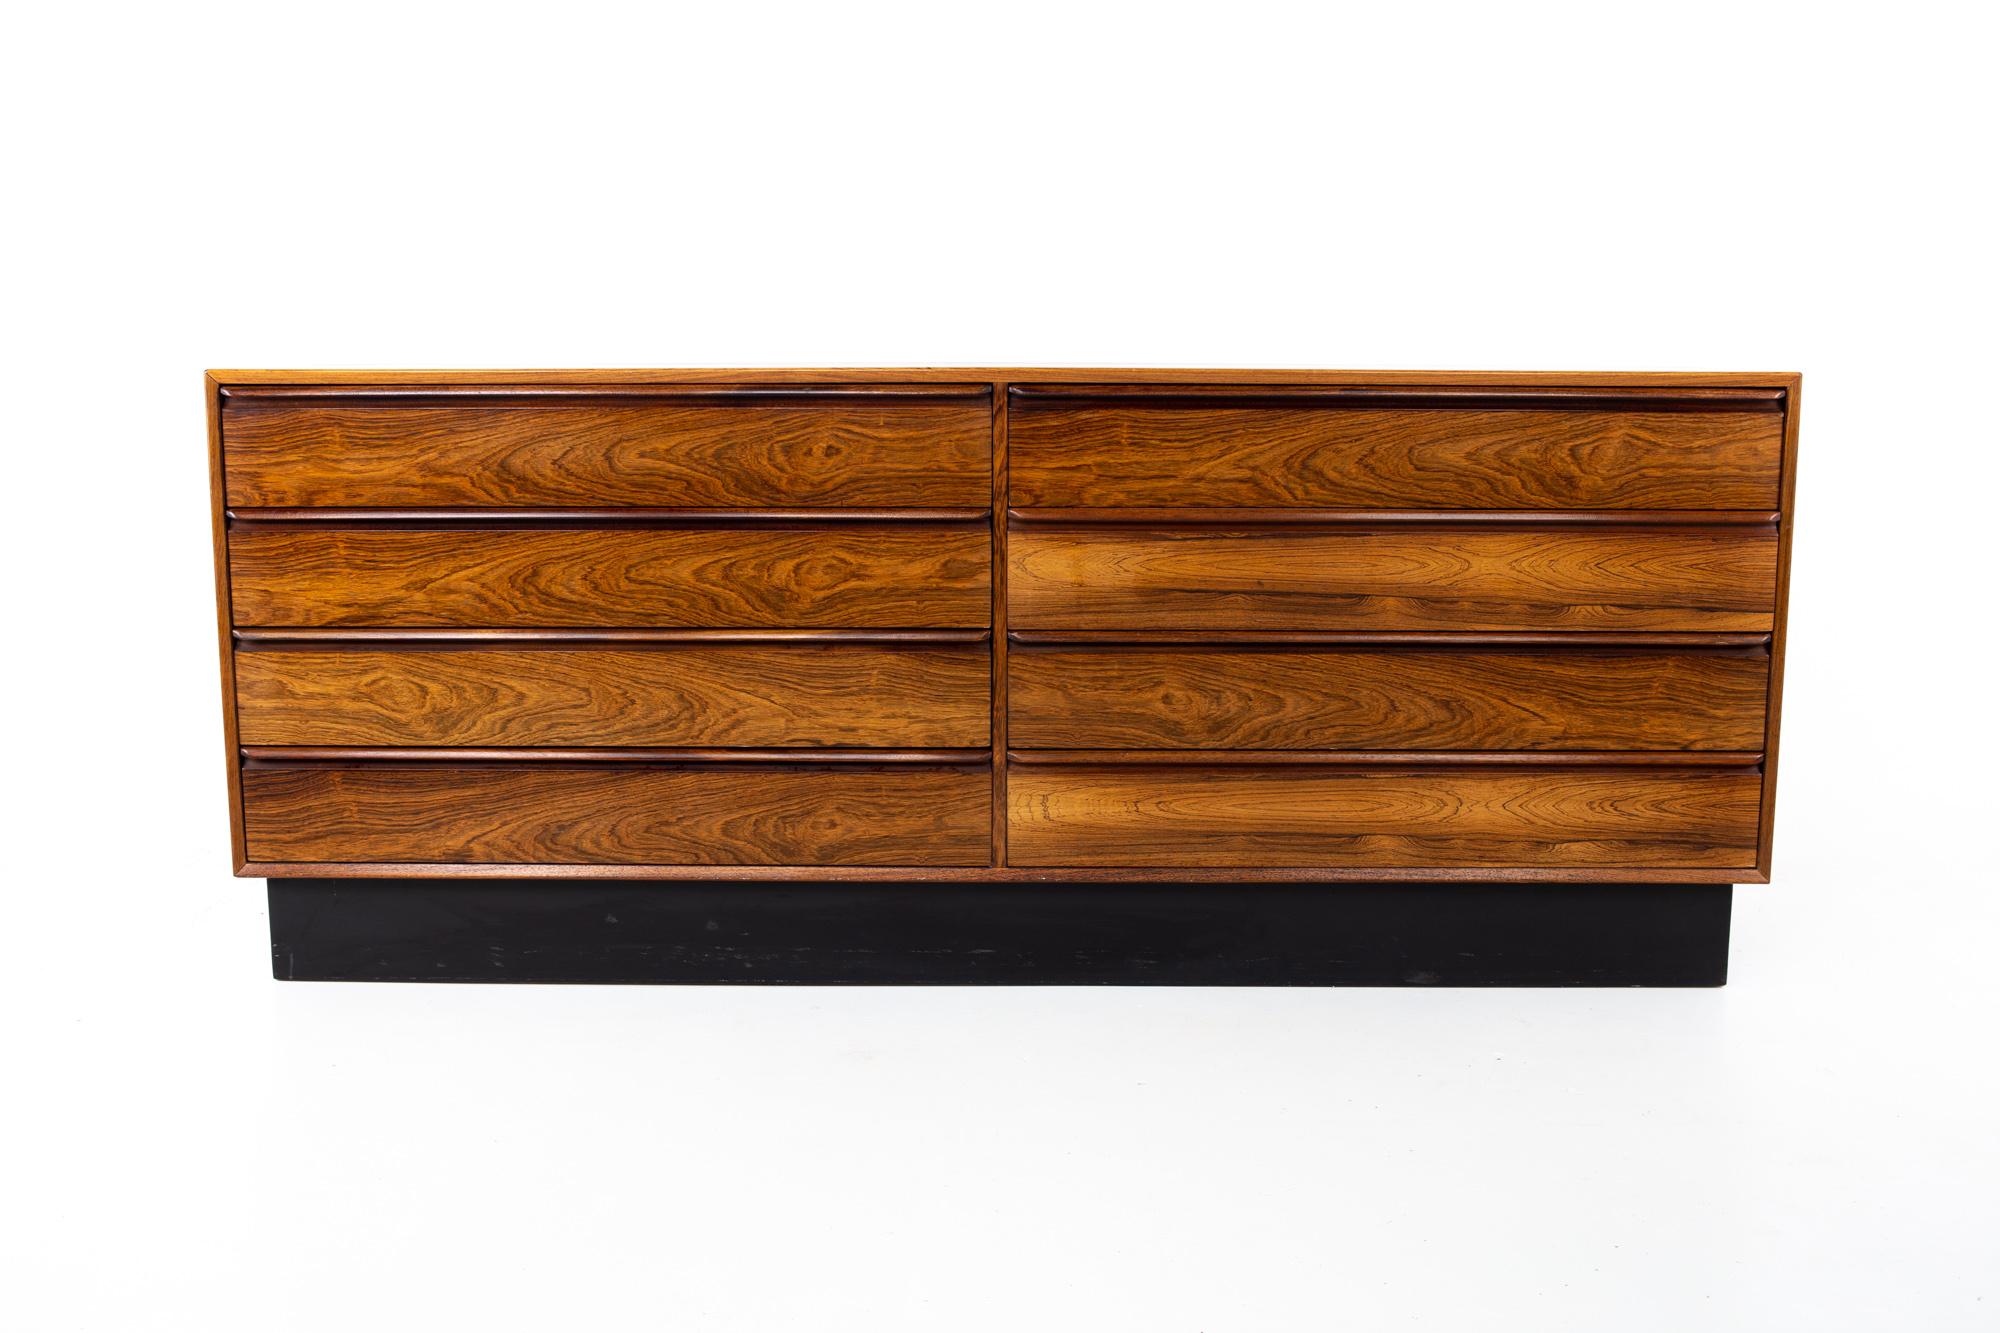 Westnofa Mid Century rosewood 8 drawer lowboy dresser
Dresser measures: 71.5 wide x 18 deep x 29 inches high

This price includes getting this piece in what we call restored vintage condition. That means the piece is permanently fixed upon purchase